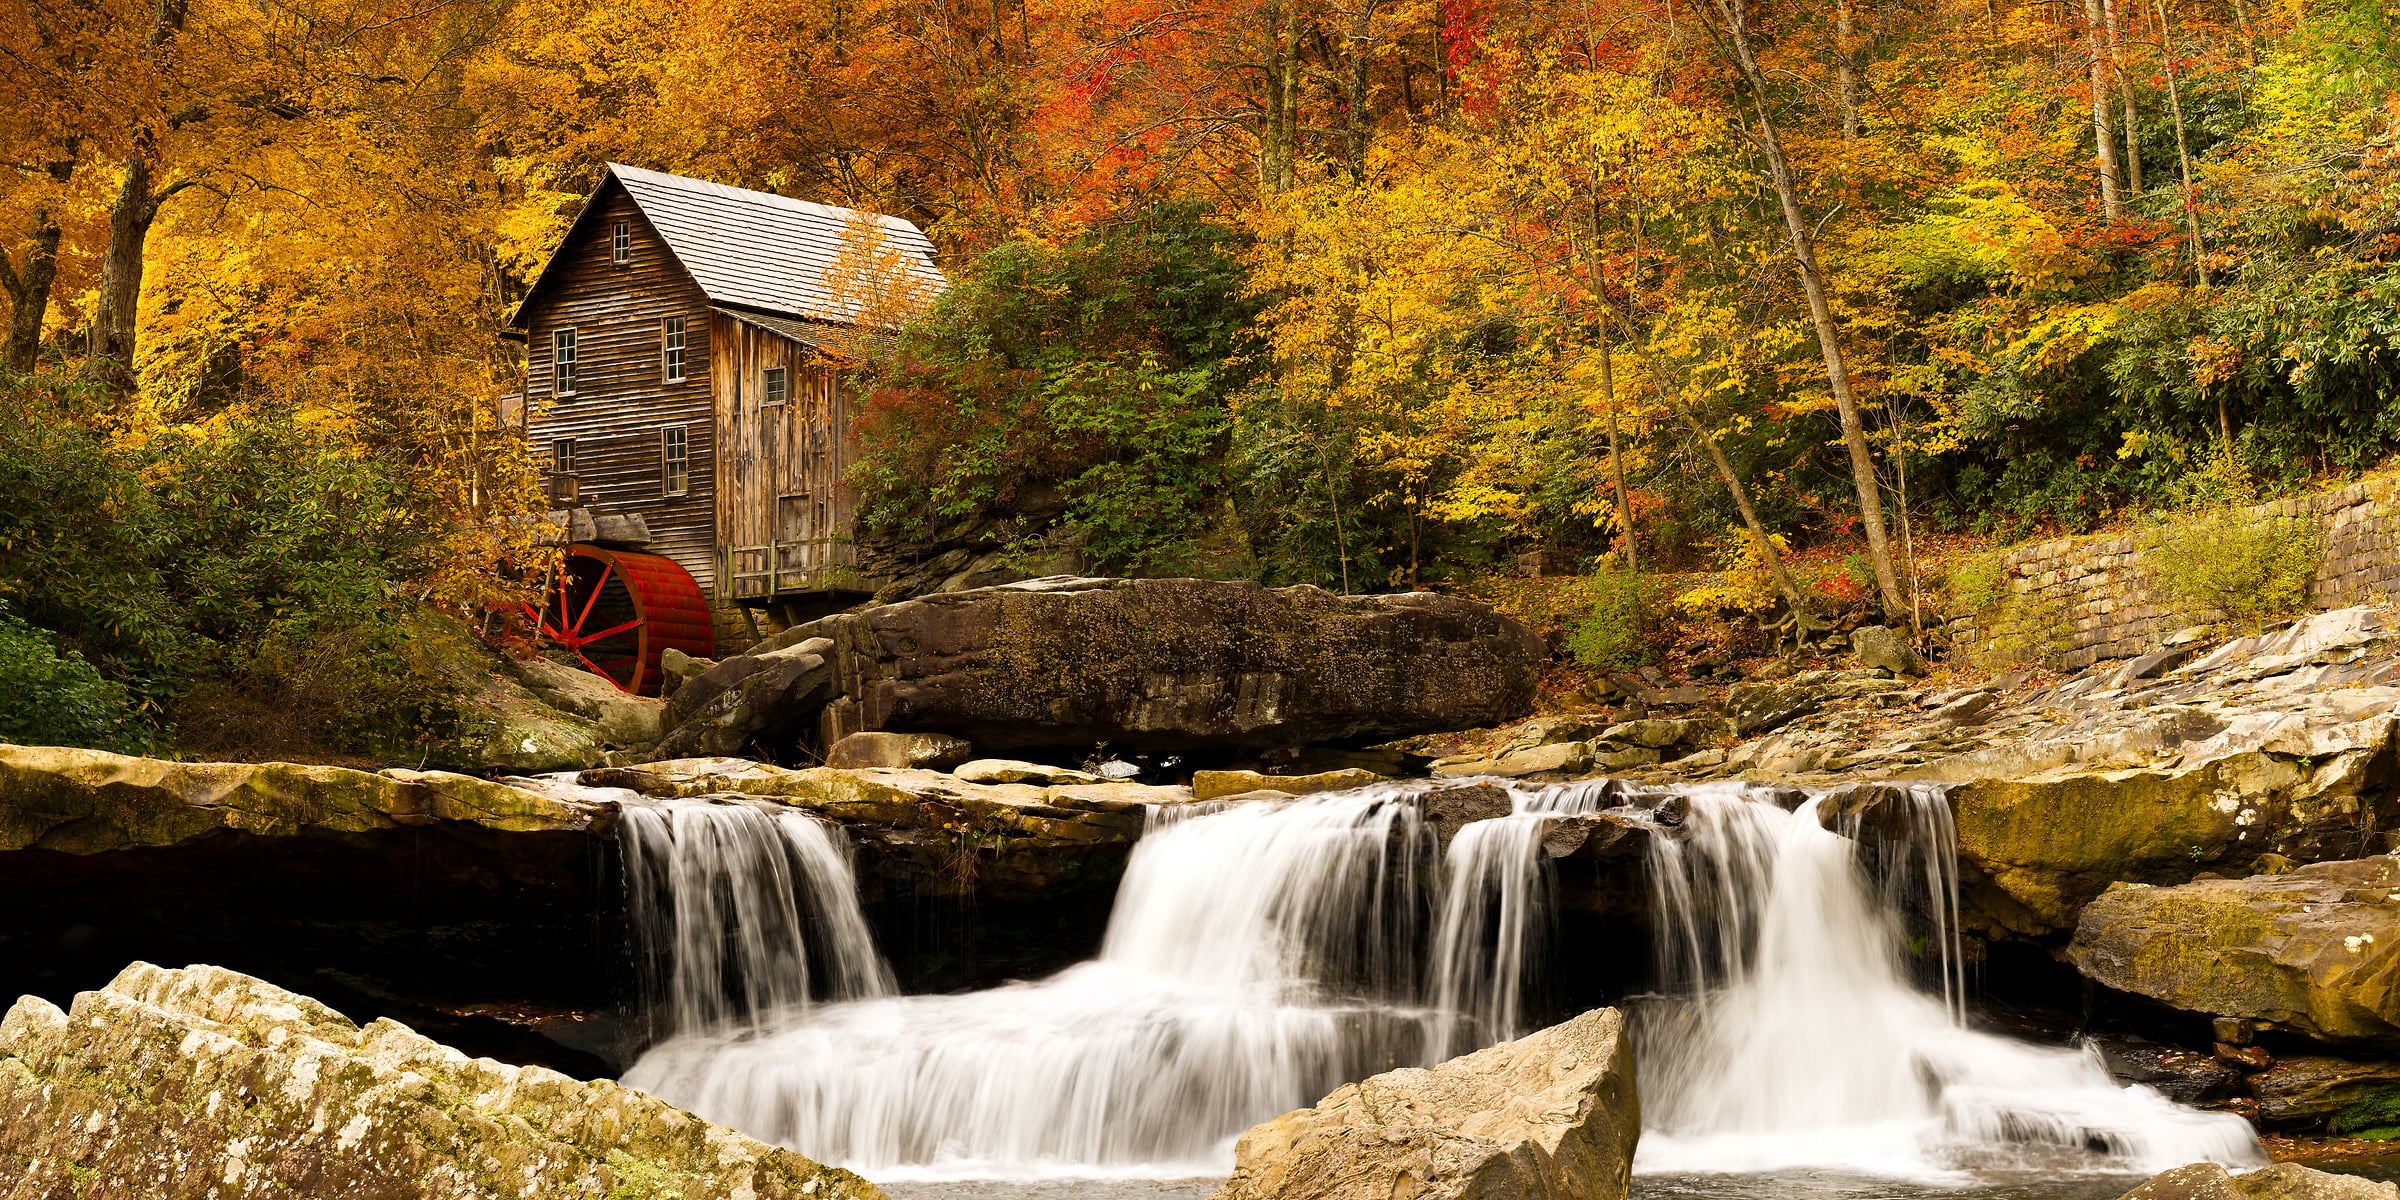 441 megapixels! A very high resolution, large-format VAST photo print of an autumn scene with fall foliage, a watermill, a forest, and waterfalls; landscape nature photograph created by David David at Glade Creek Grist Mill in Babcock State Park, West Virginia